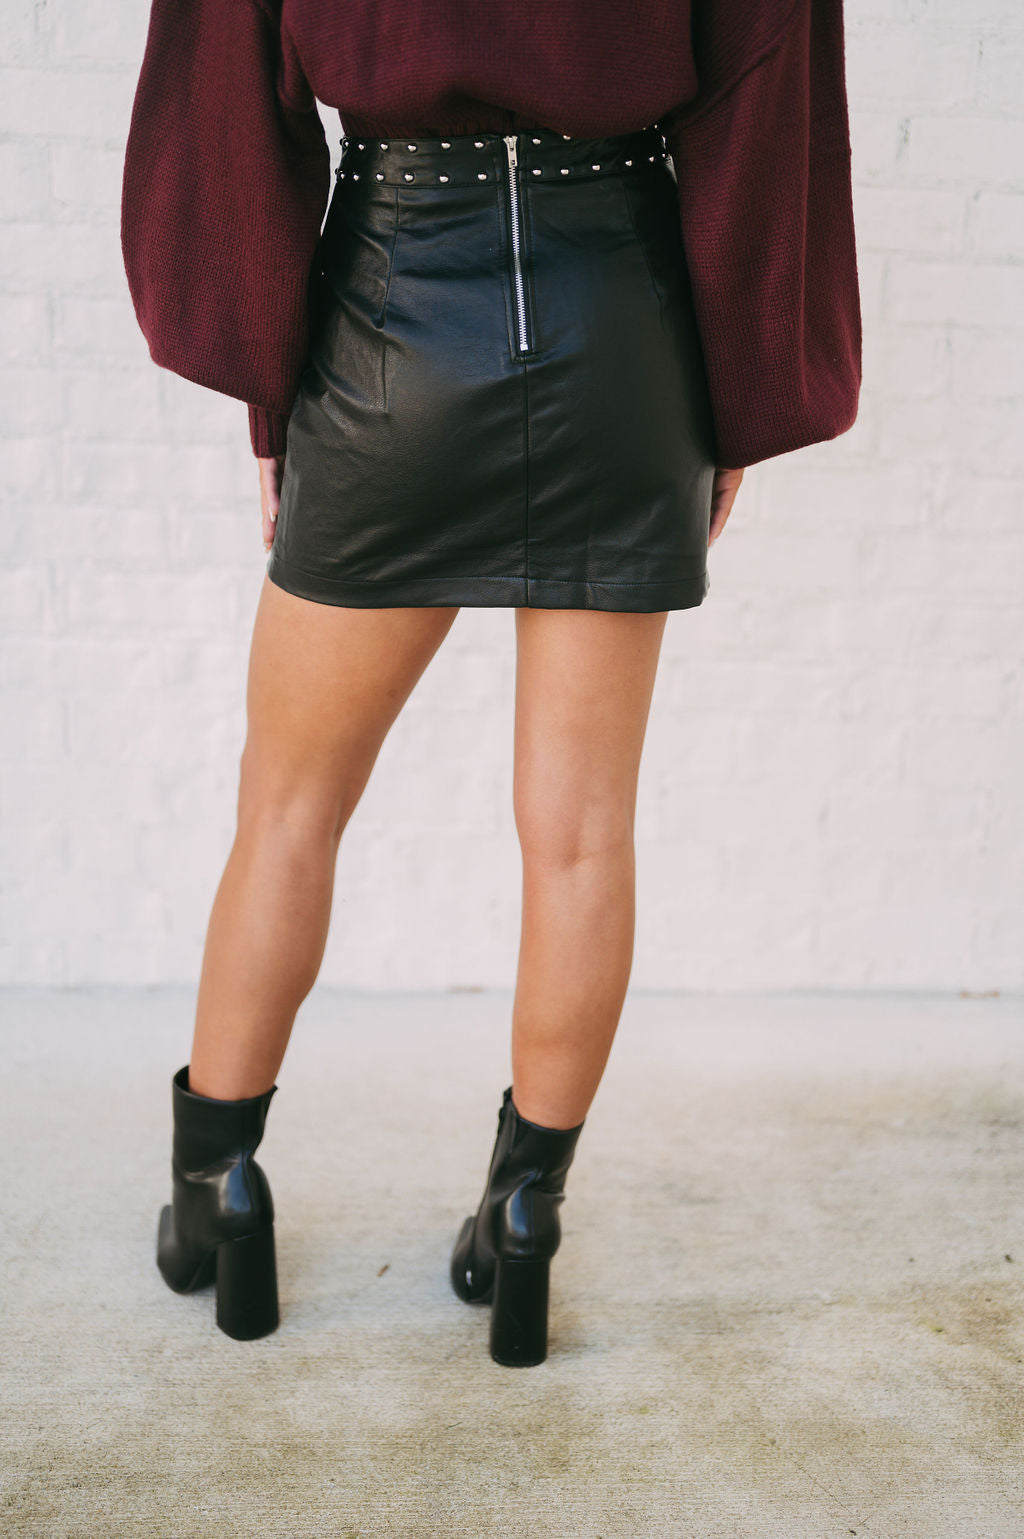 Studded Faux Leather Mini Skirt//size small 2-4